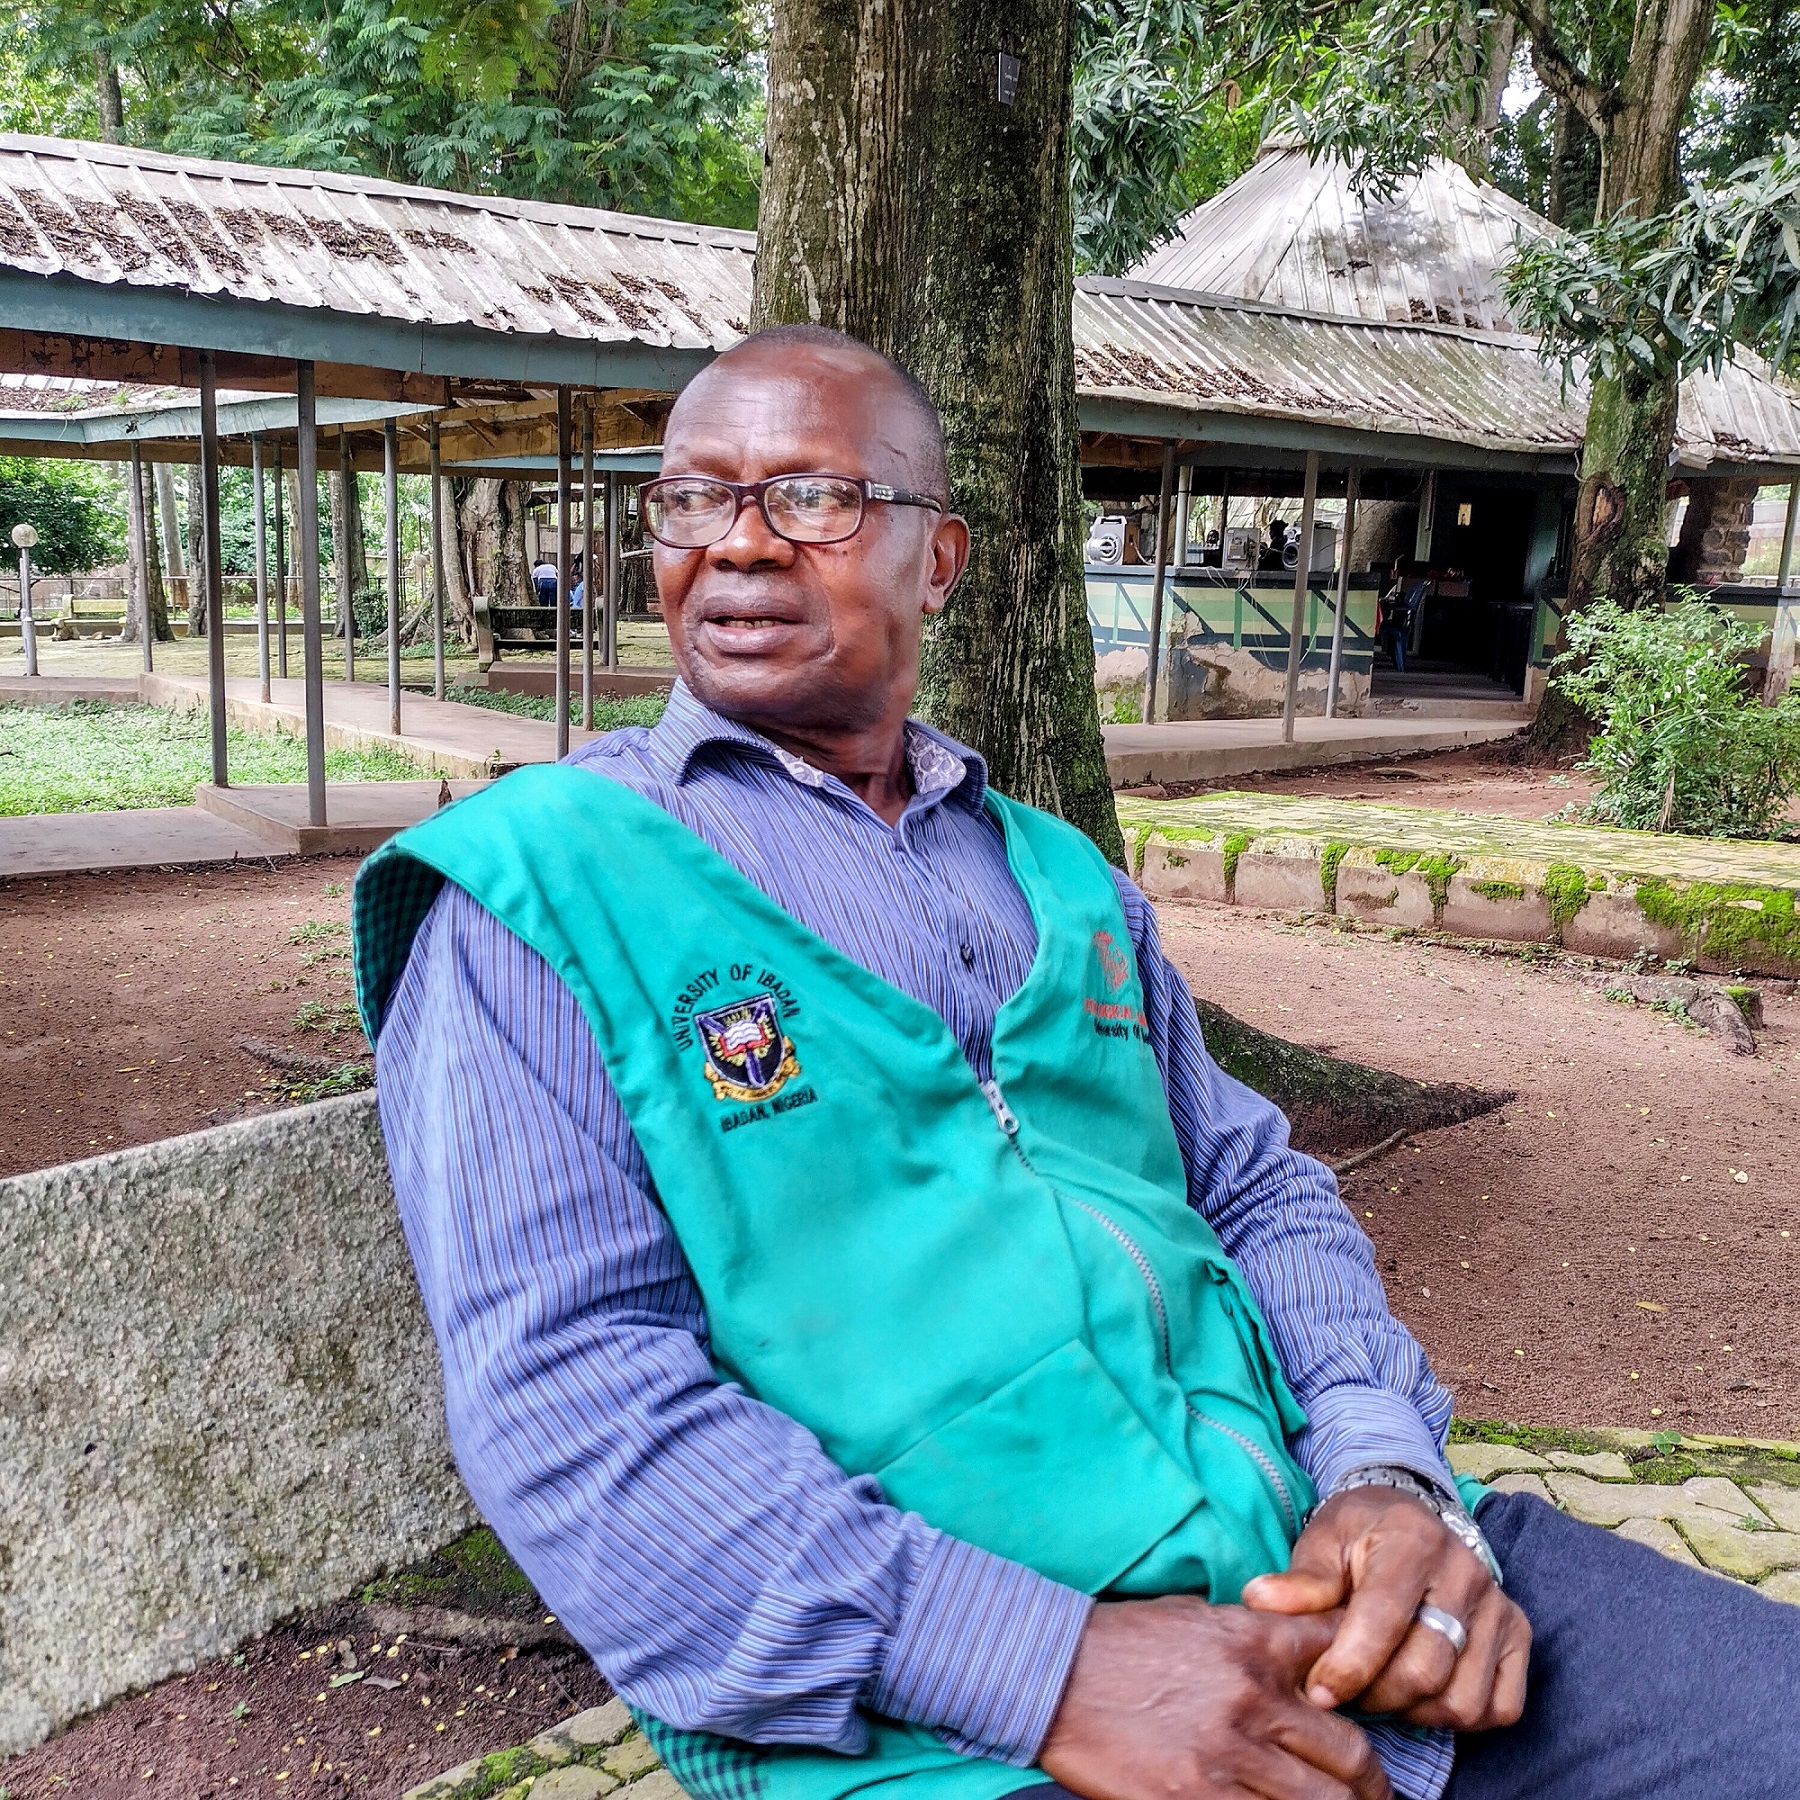 I've been working at the University of Ibadan zoo for 41 years, starting as an attendant and now a supervisor